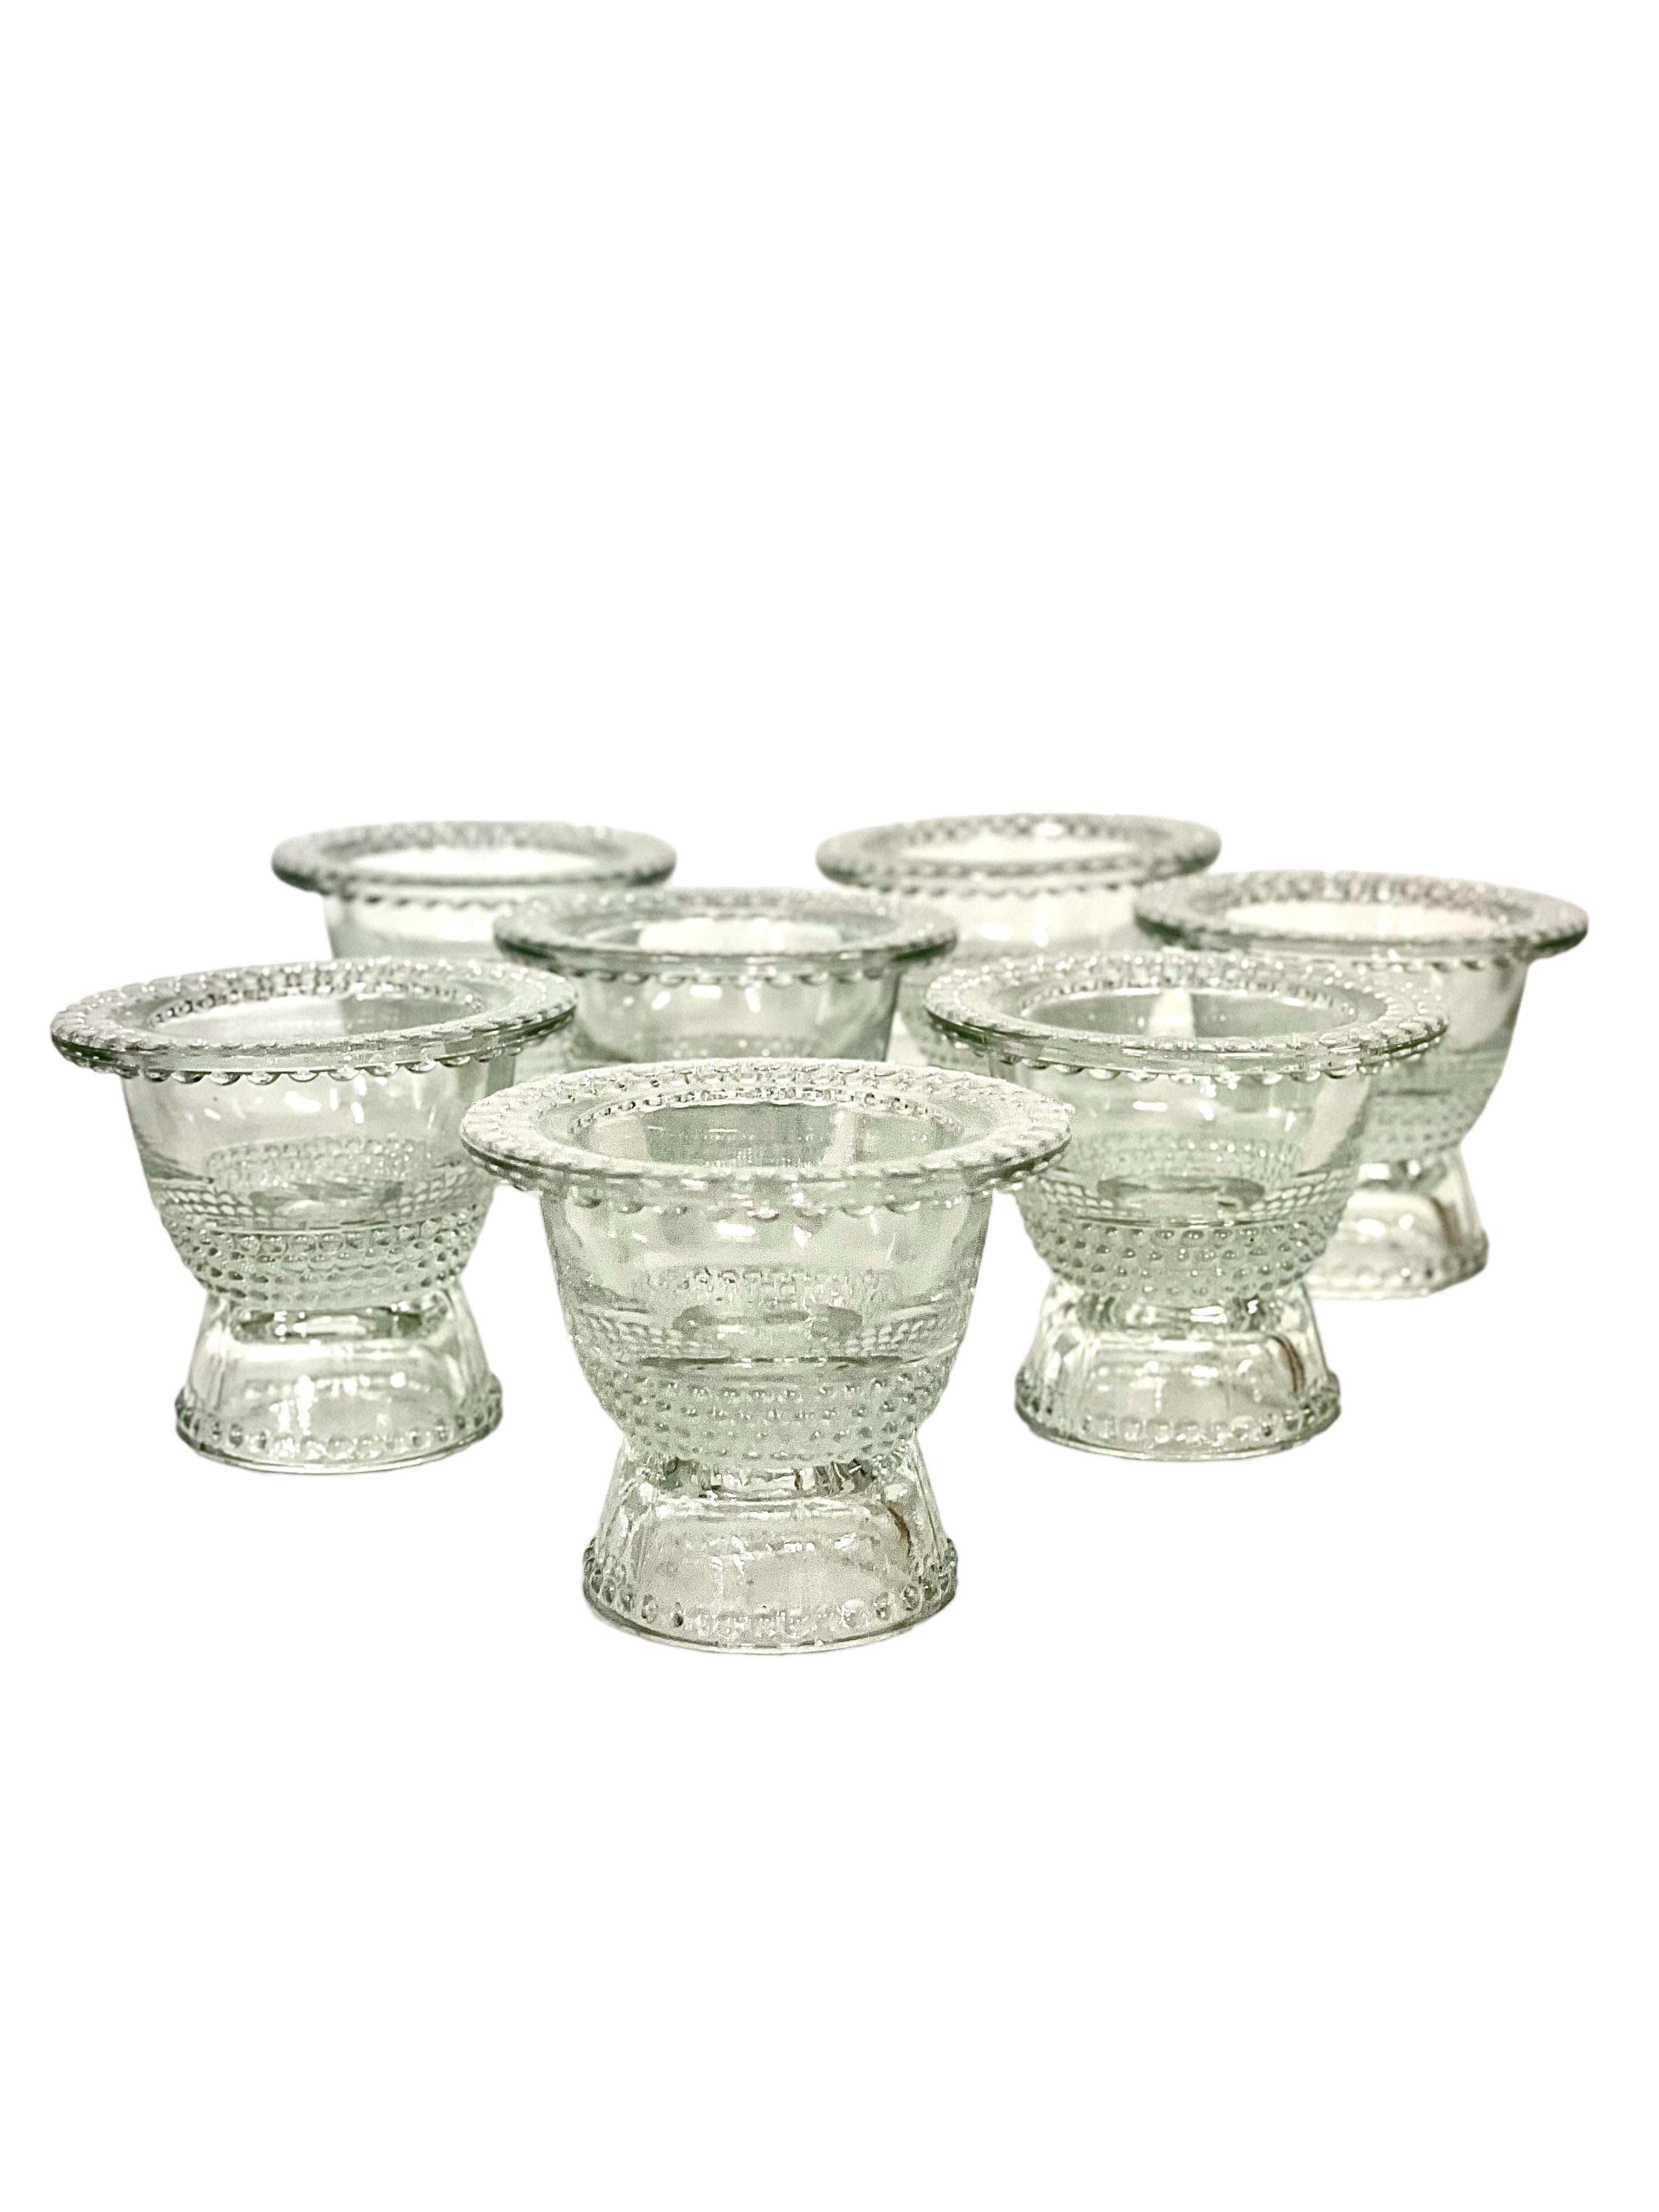 This sparkling breakfast (or sorbet) service by renowned French glass designer René Lalique comprises a lidded butter, or fruit dish and seven coquetiers (egg cups), and dates from 1933. Part of the celebrated 'Nippon' range, which was an important